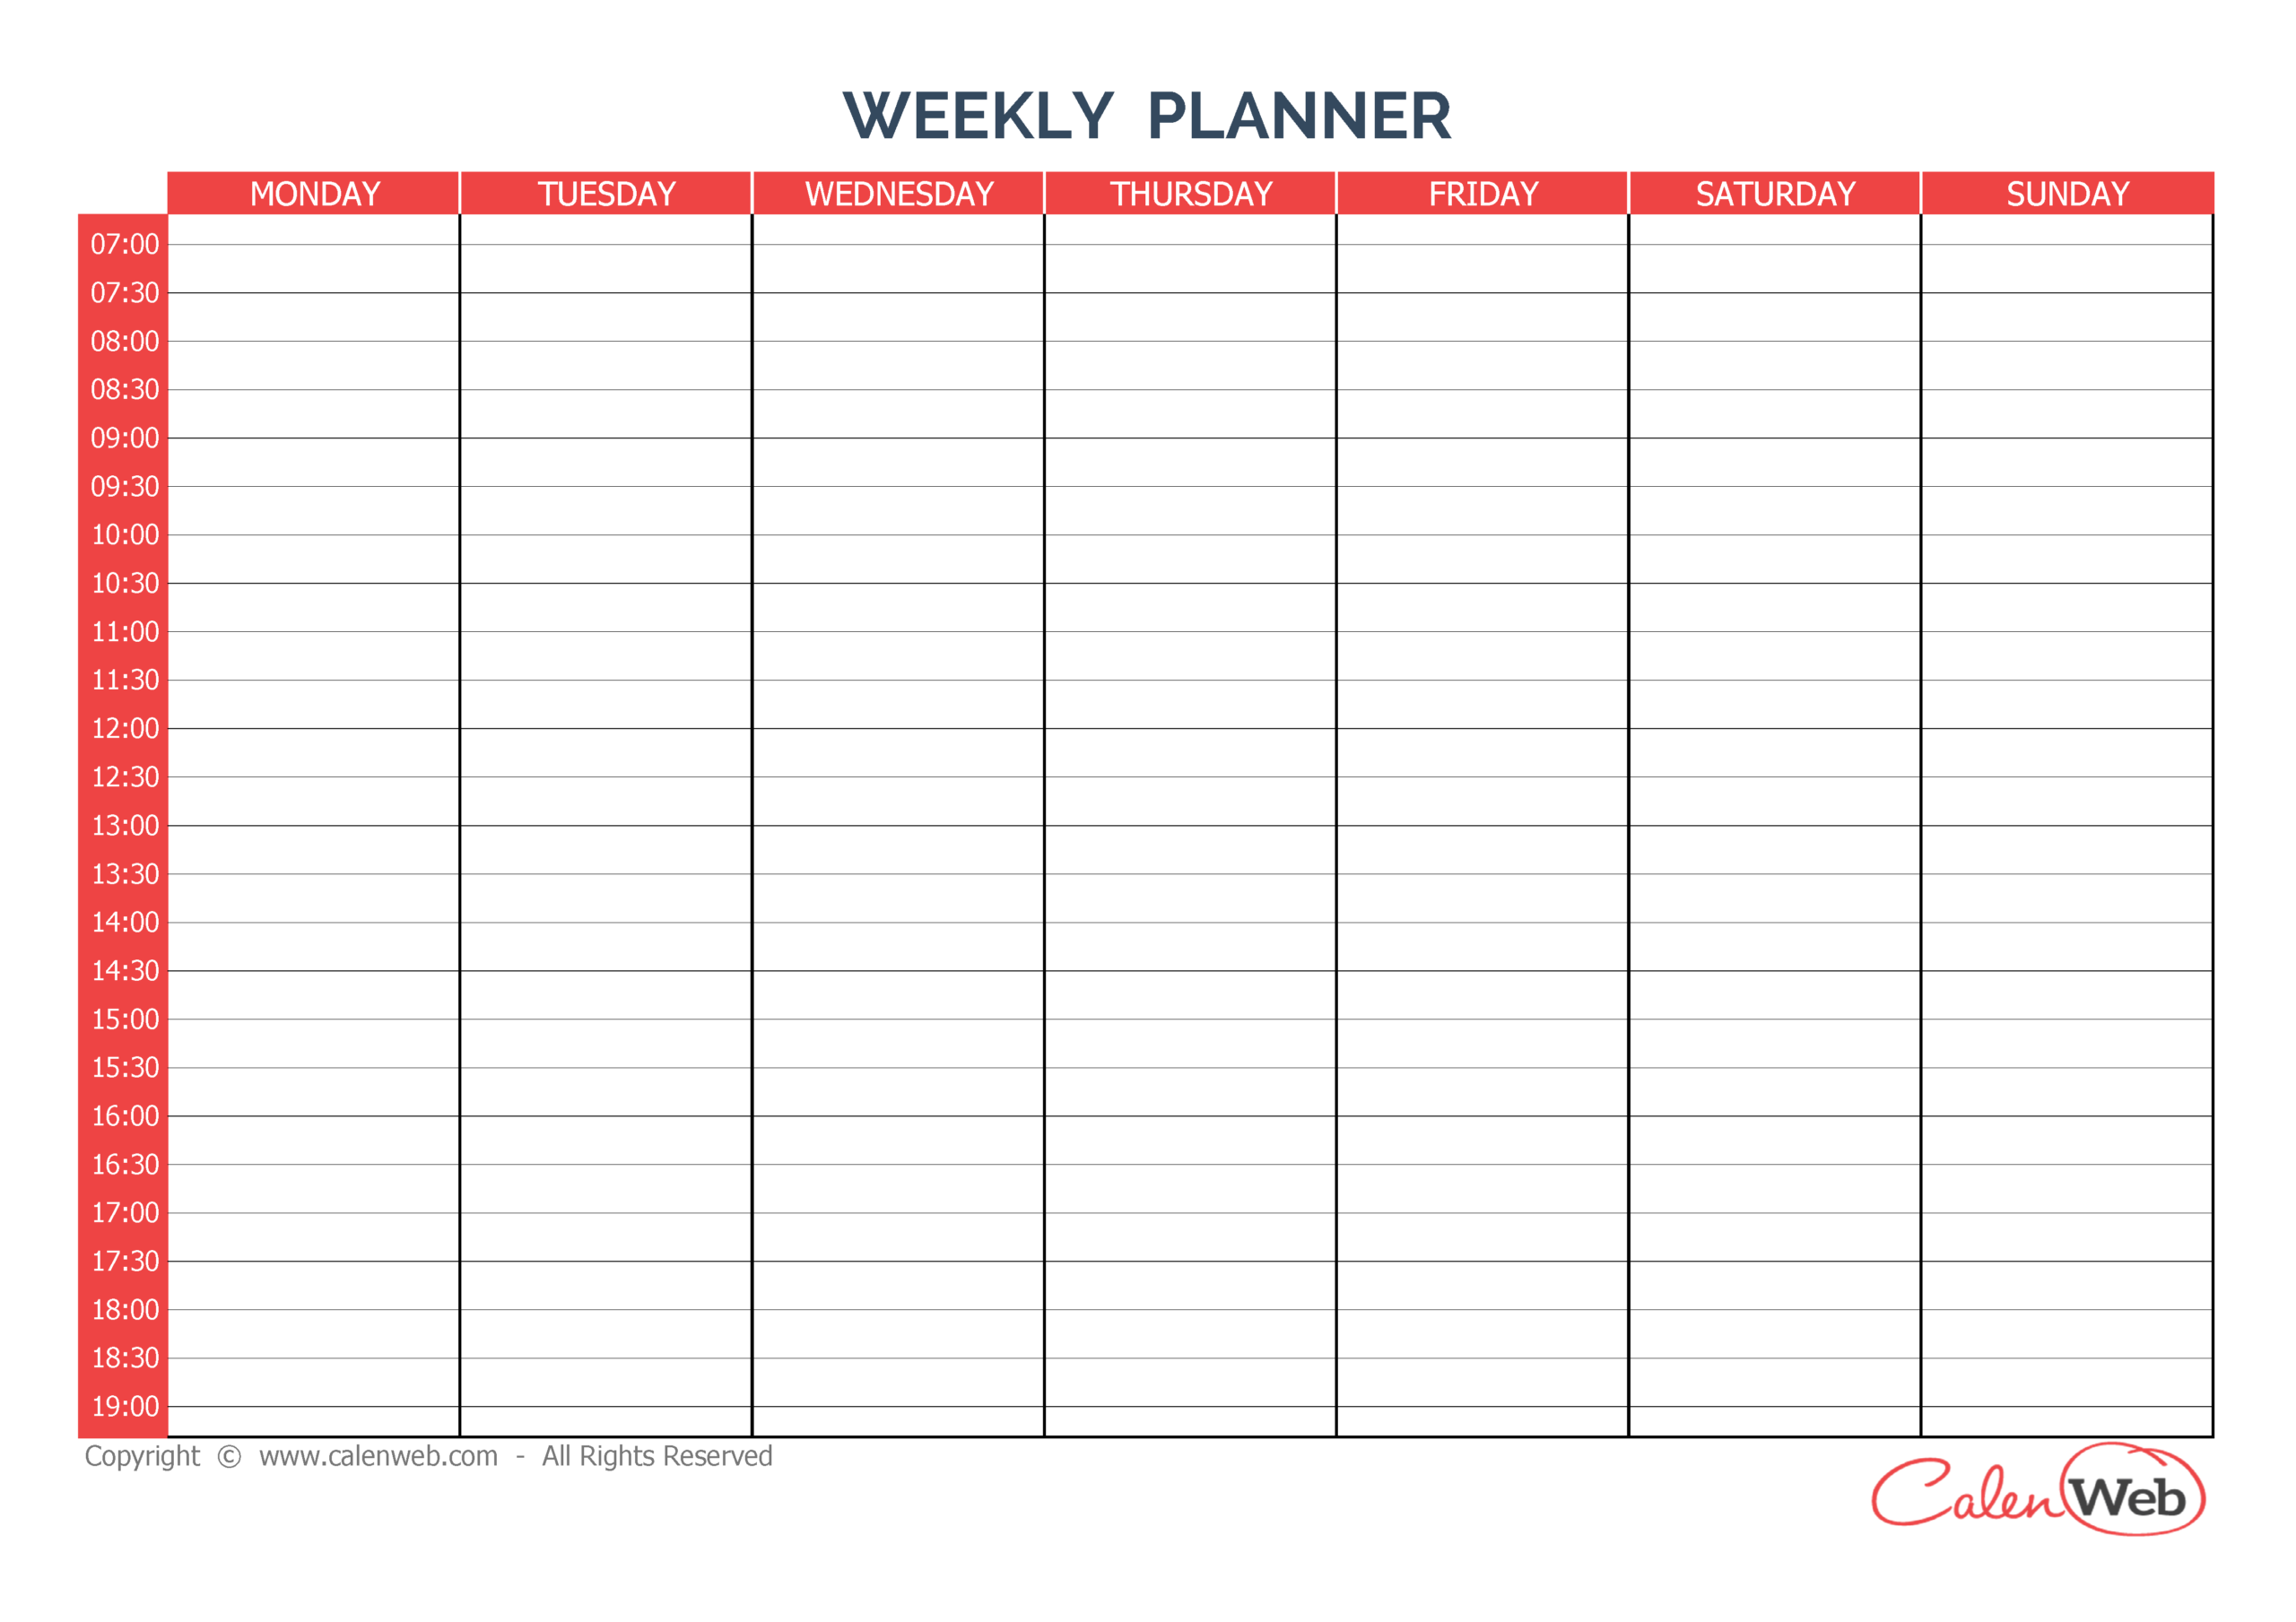 Weekly Planner 7 Days - First Day: Monday A Week Of 7 Days